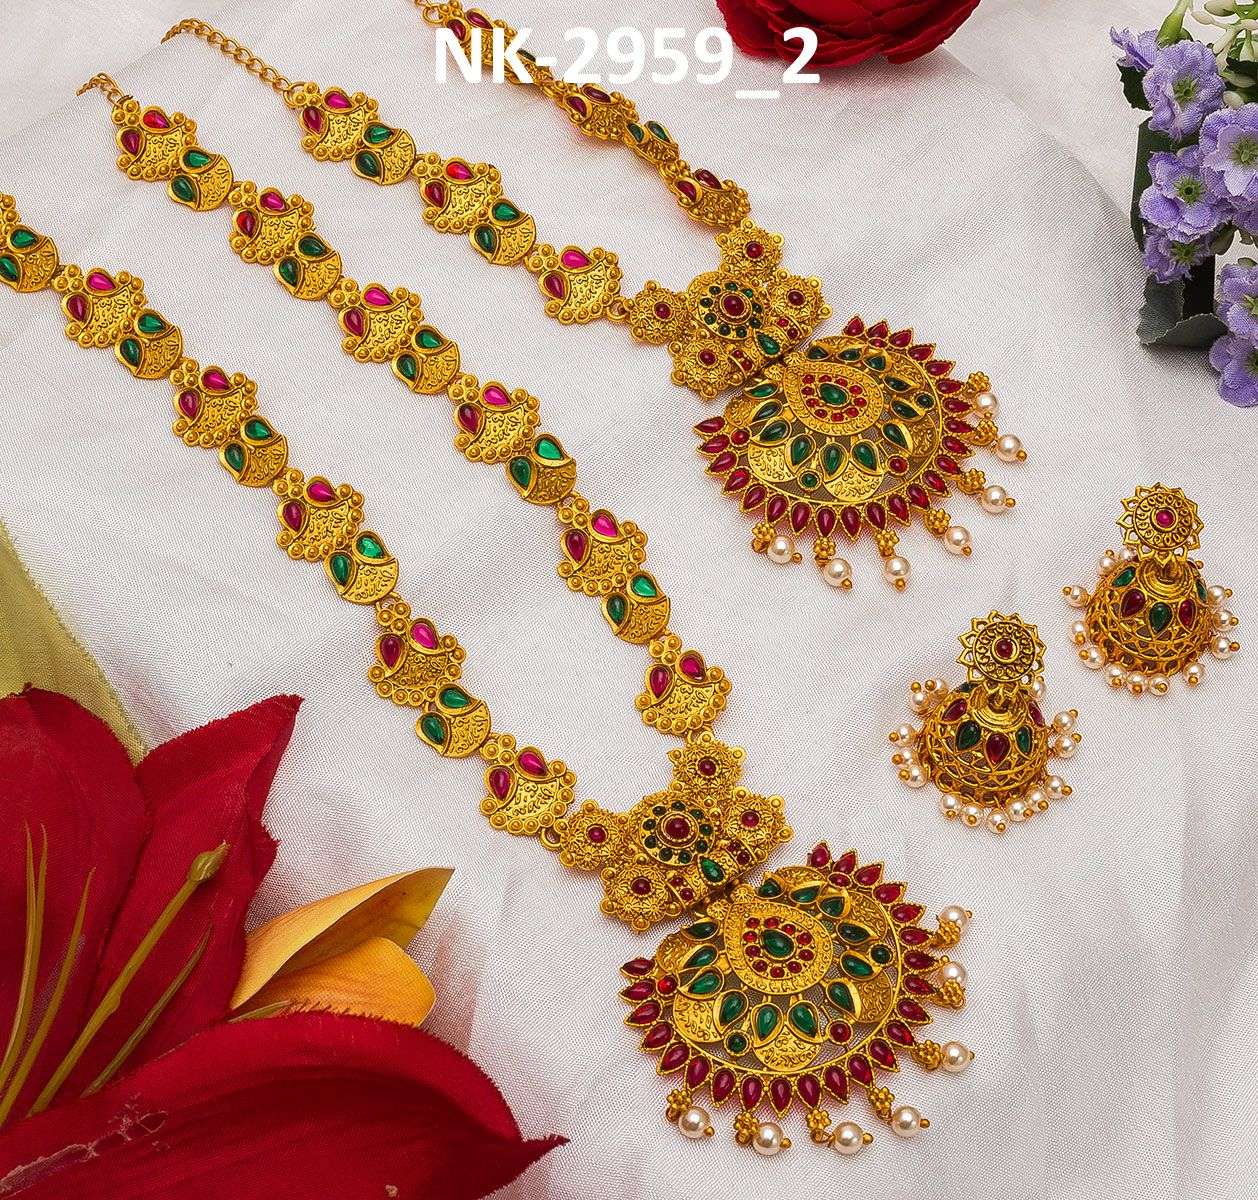 NK-2954 BY FASHID WHOLESALE TRADITIONAL ARTIFICIAL JEWELLERY FOR INDIAN ATTIRE AT EXCLUSIVE RANGE.